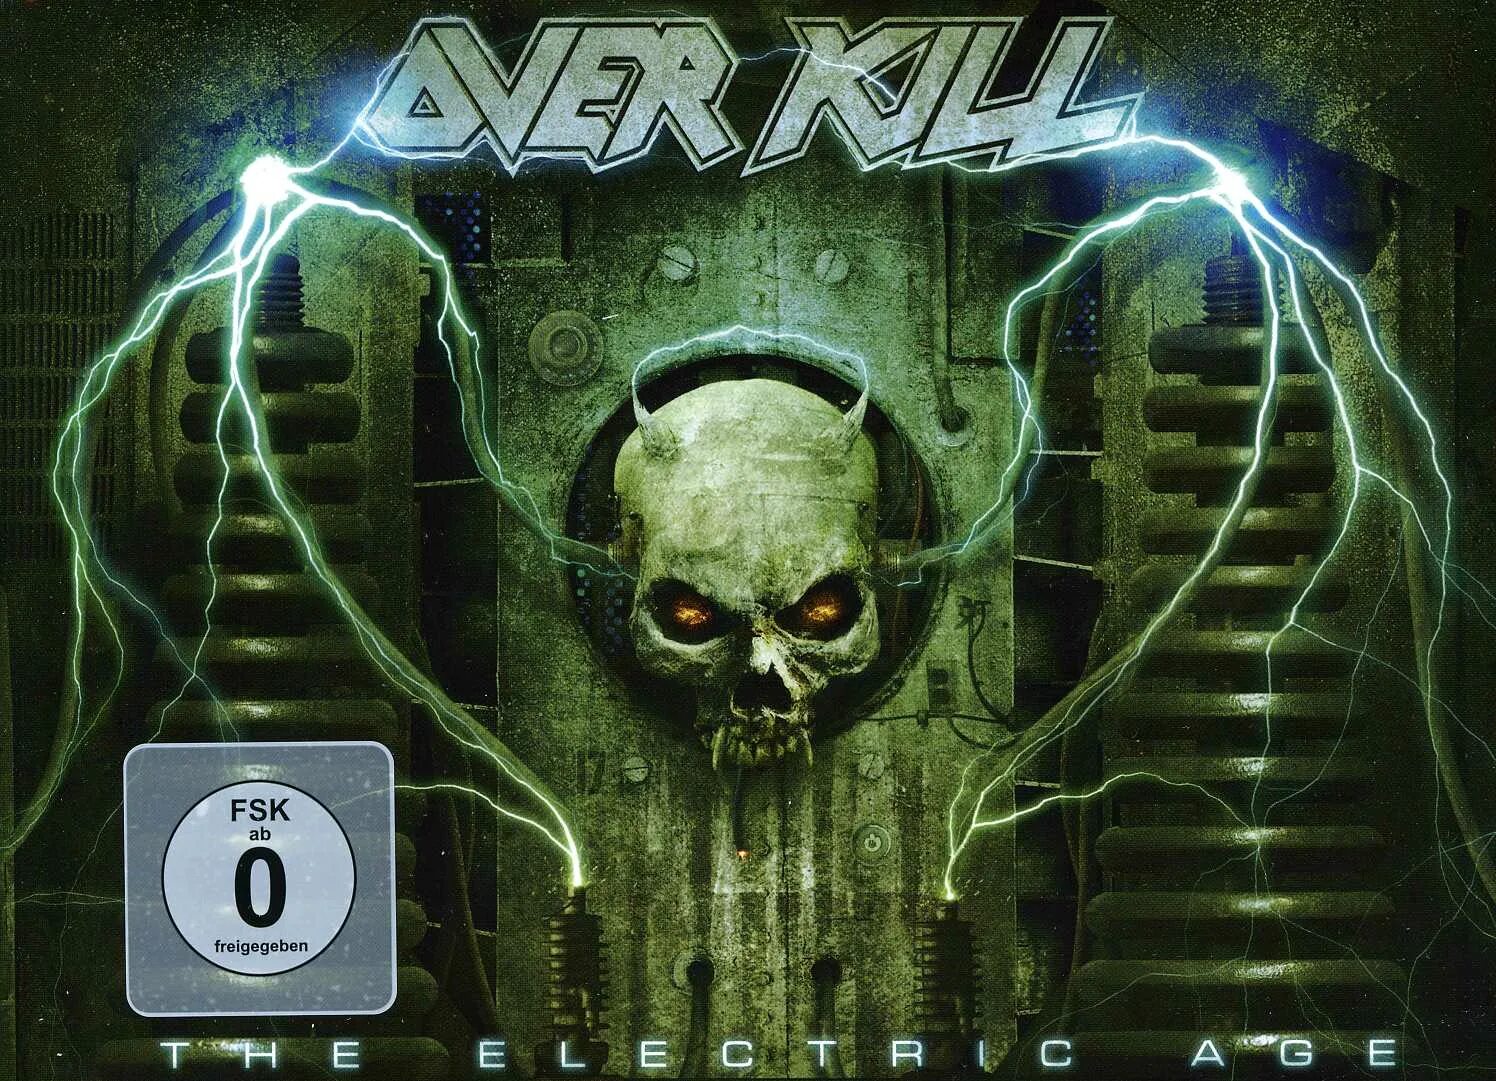 Kill over. Overkill the Electric age 2012. Overkill 2014 White Devil Armory. Overkill "White Devil Armory". Overkill the Electric age [cd1 the Electric age].